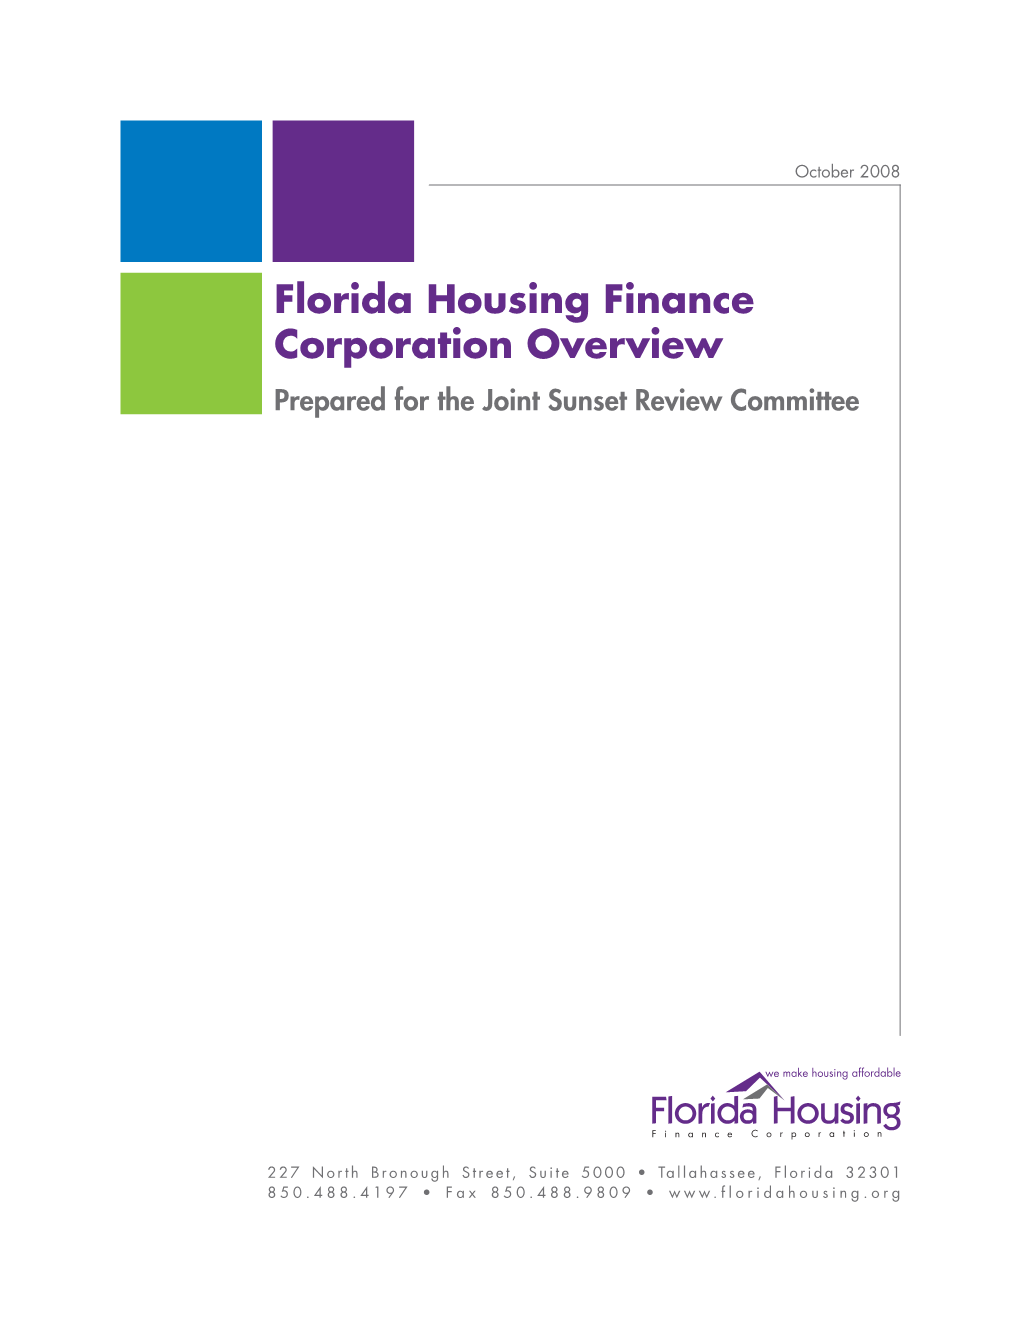 Florida Housing Finance Corporation Overview Prepared for the Joint Sunset Review Committee